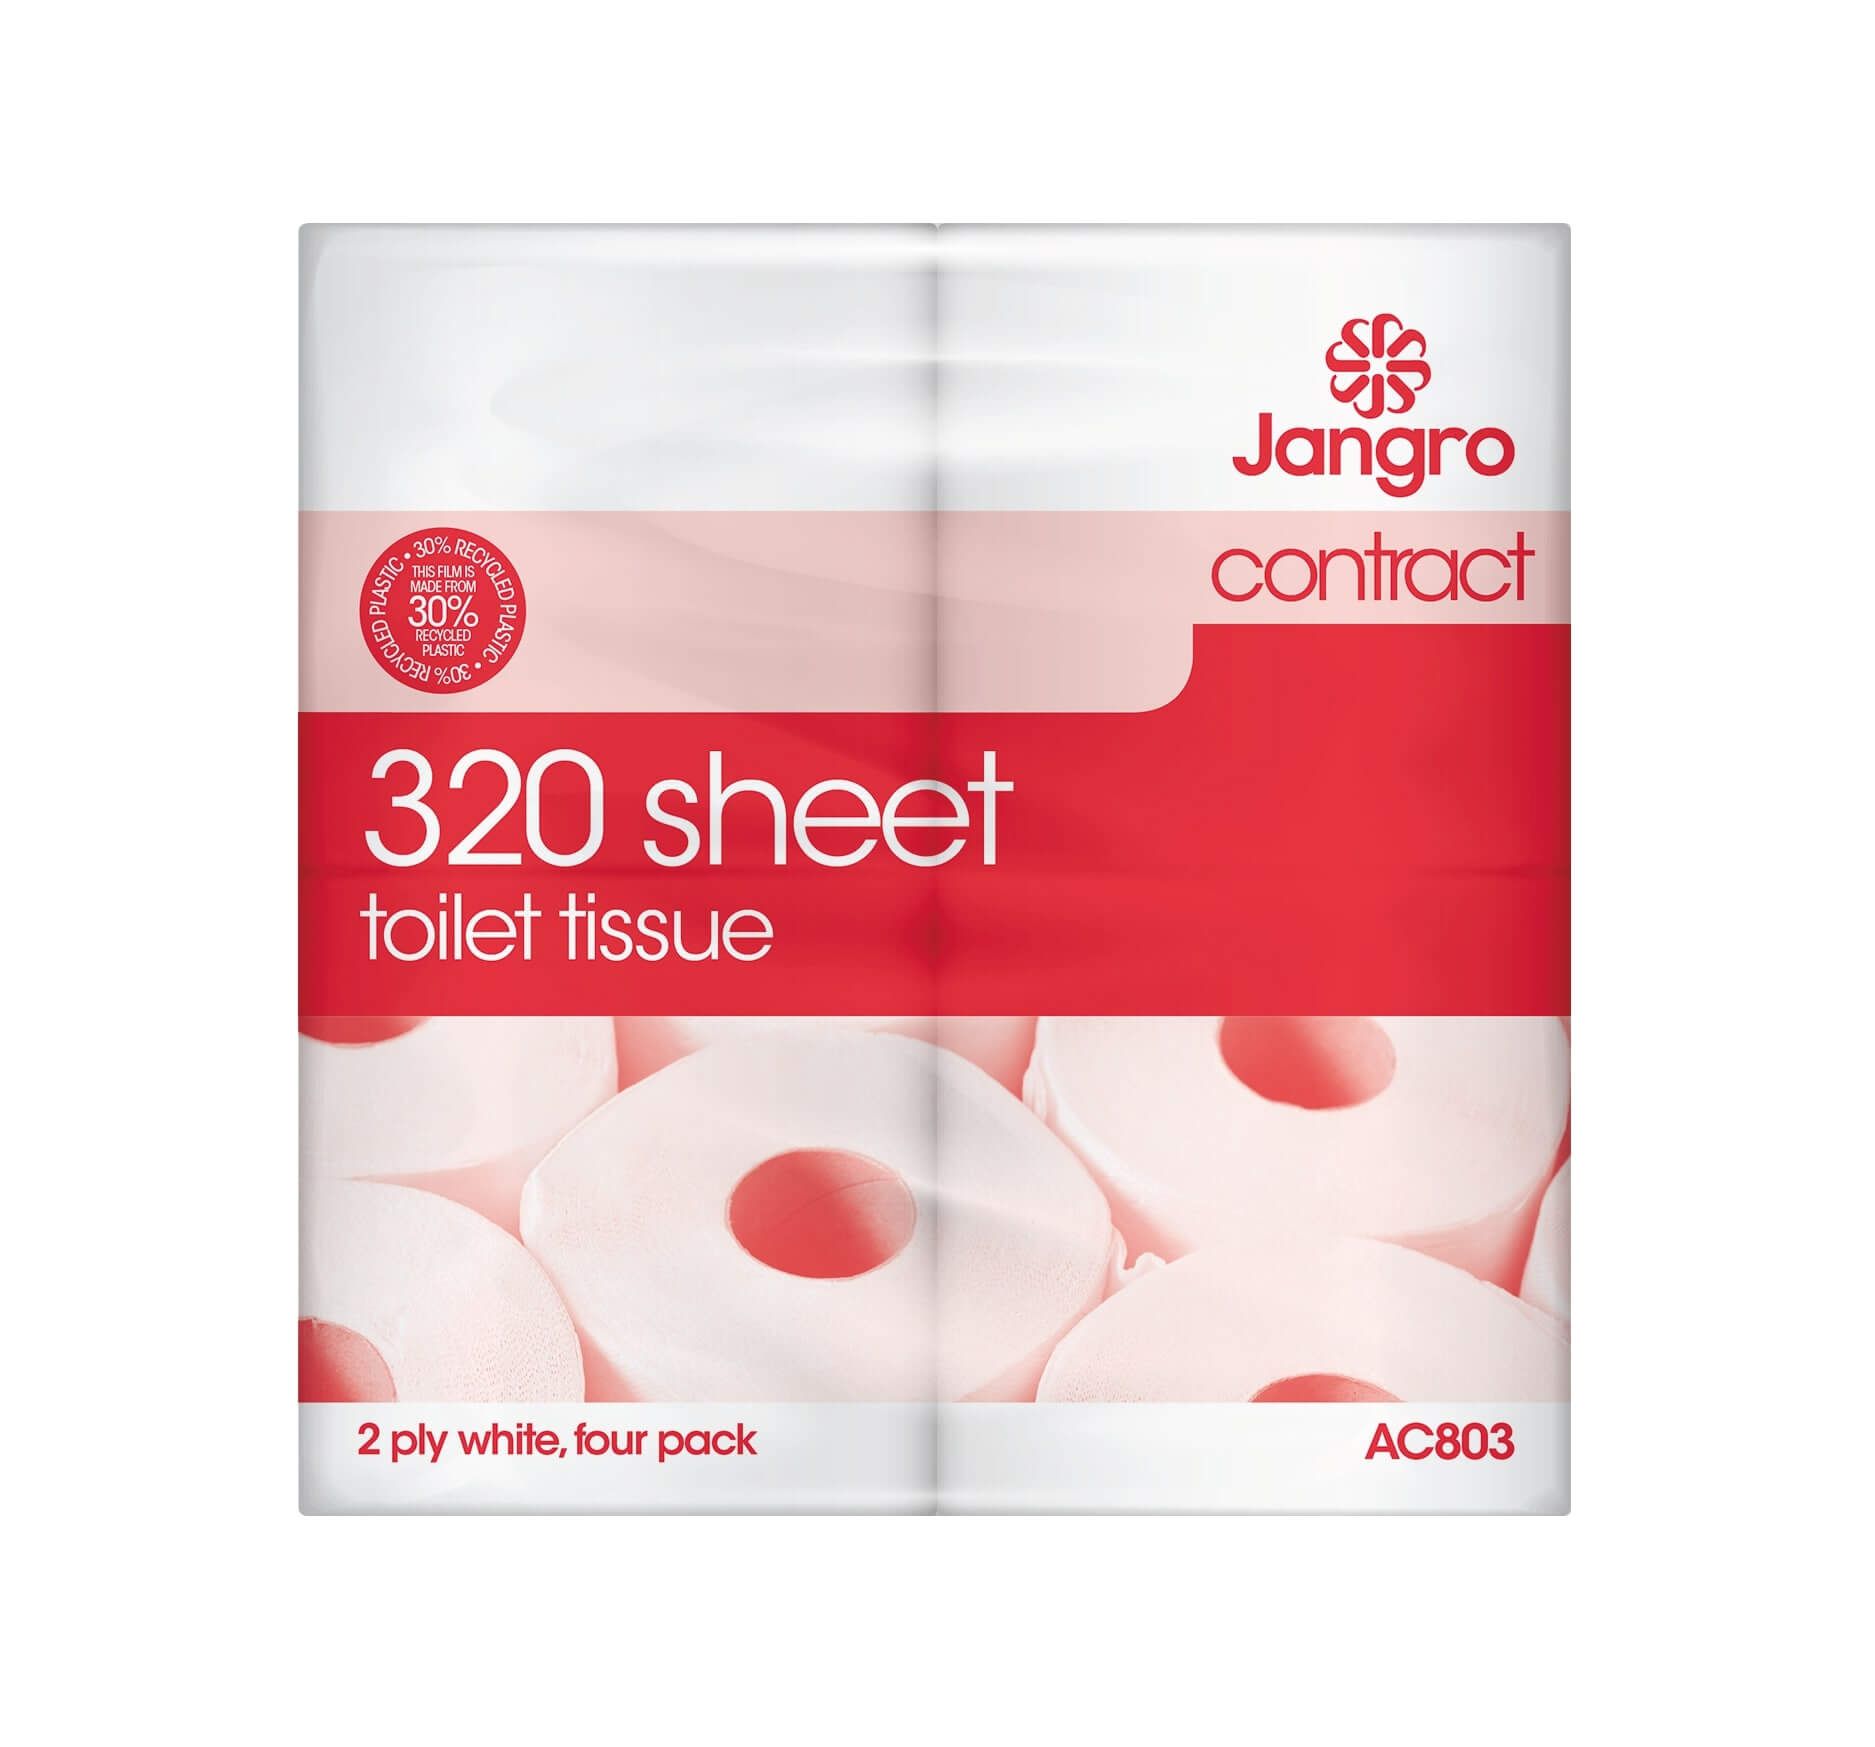 Jangro CONTRACT 320 Sheet Toilet Roll 4 Pack 2-Ply